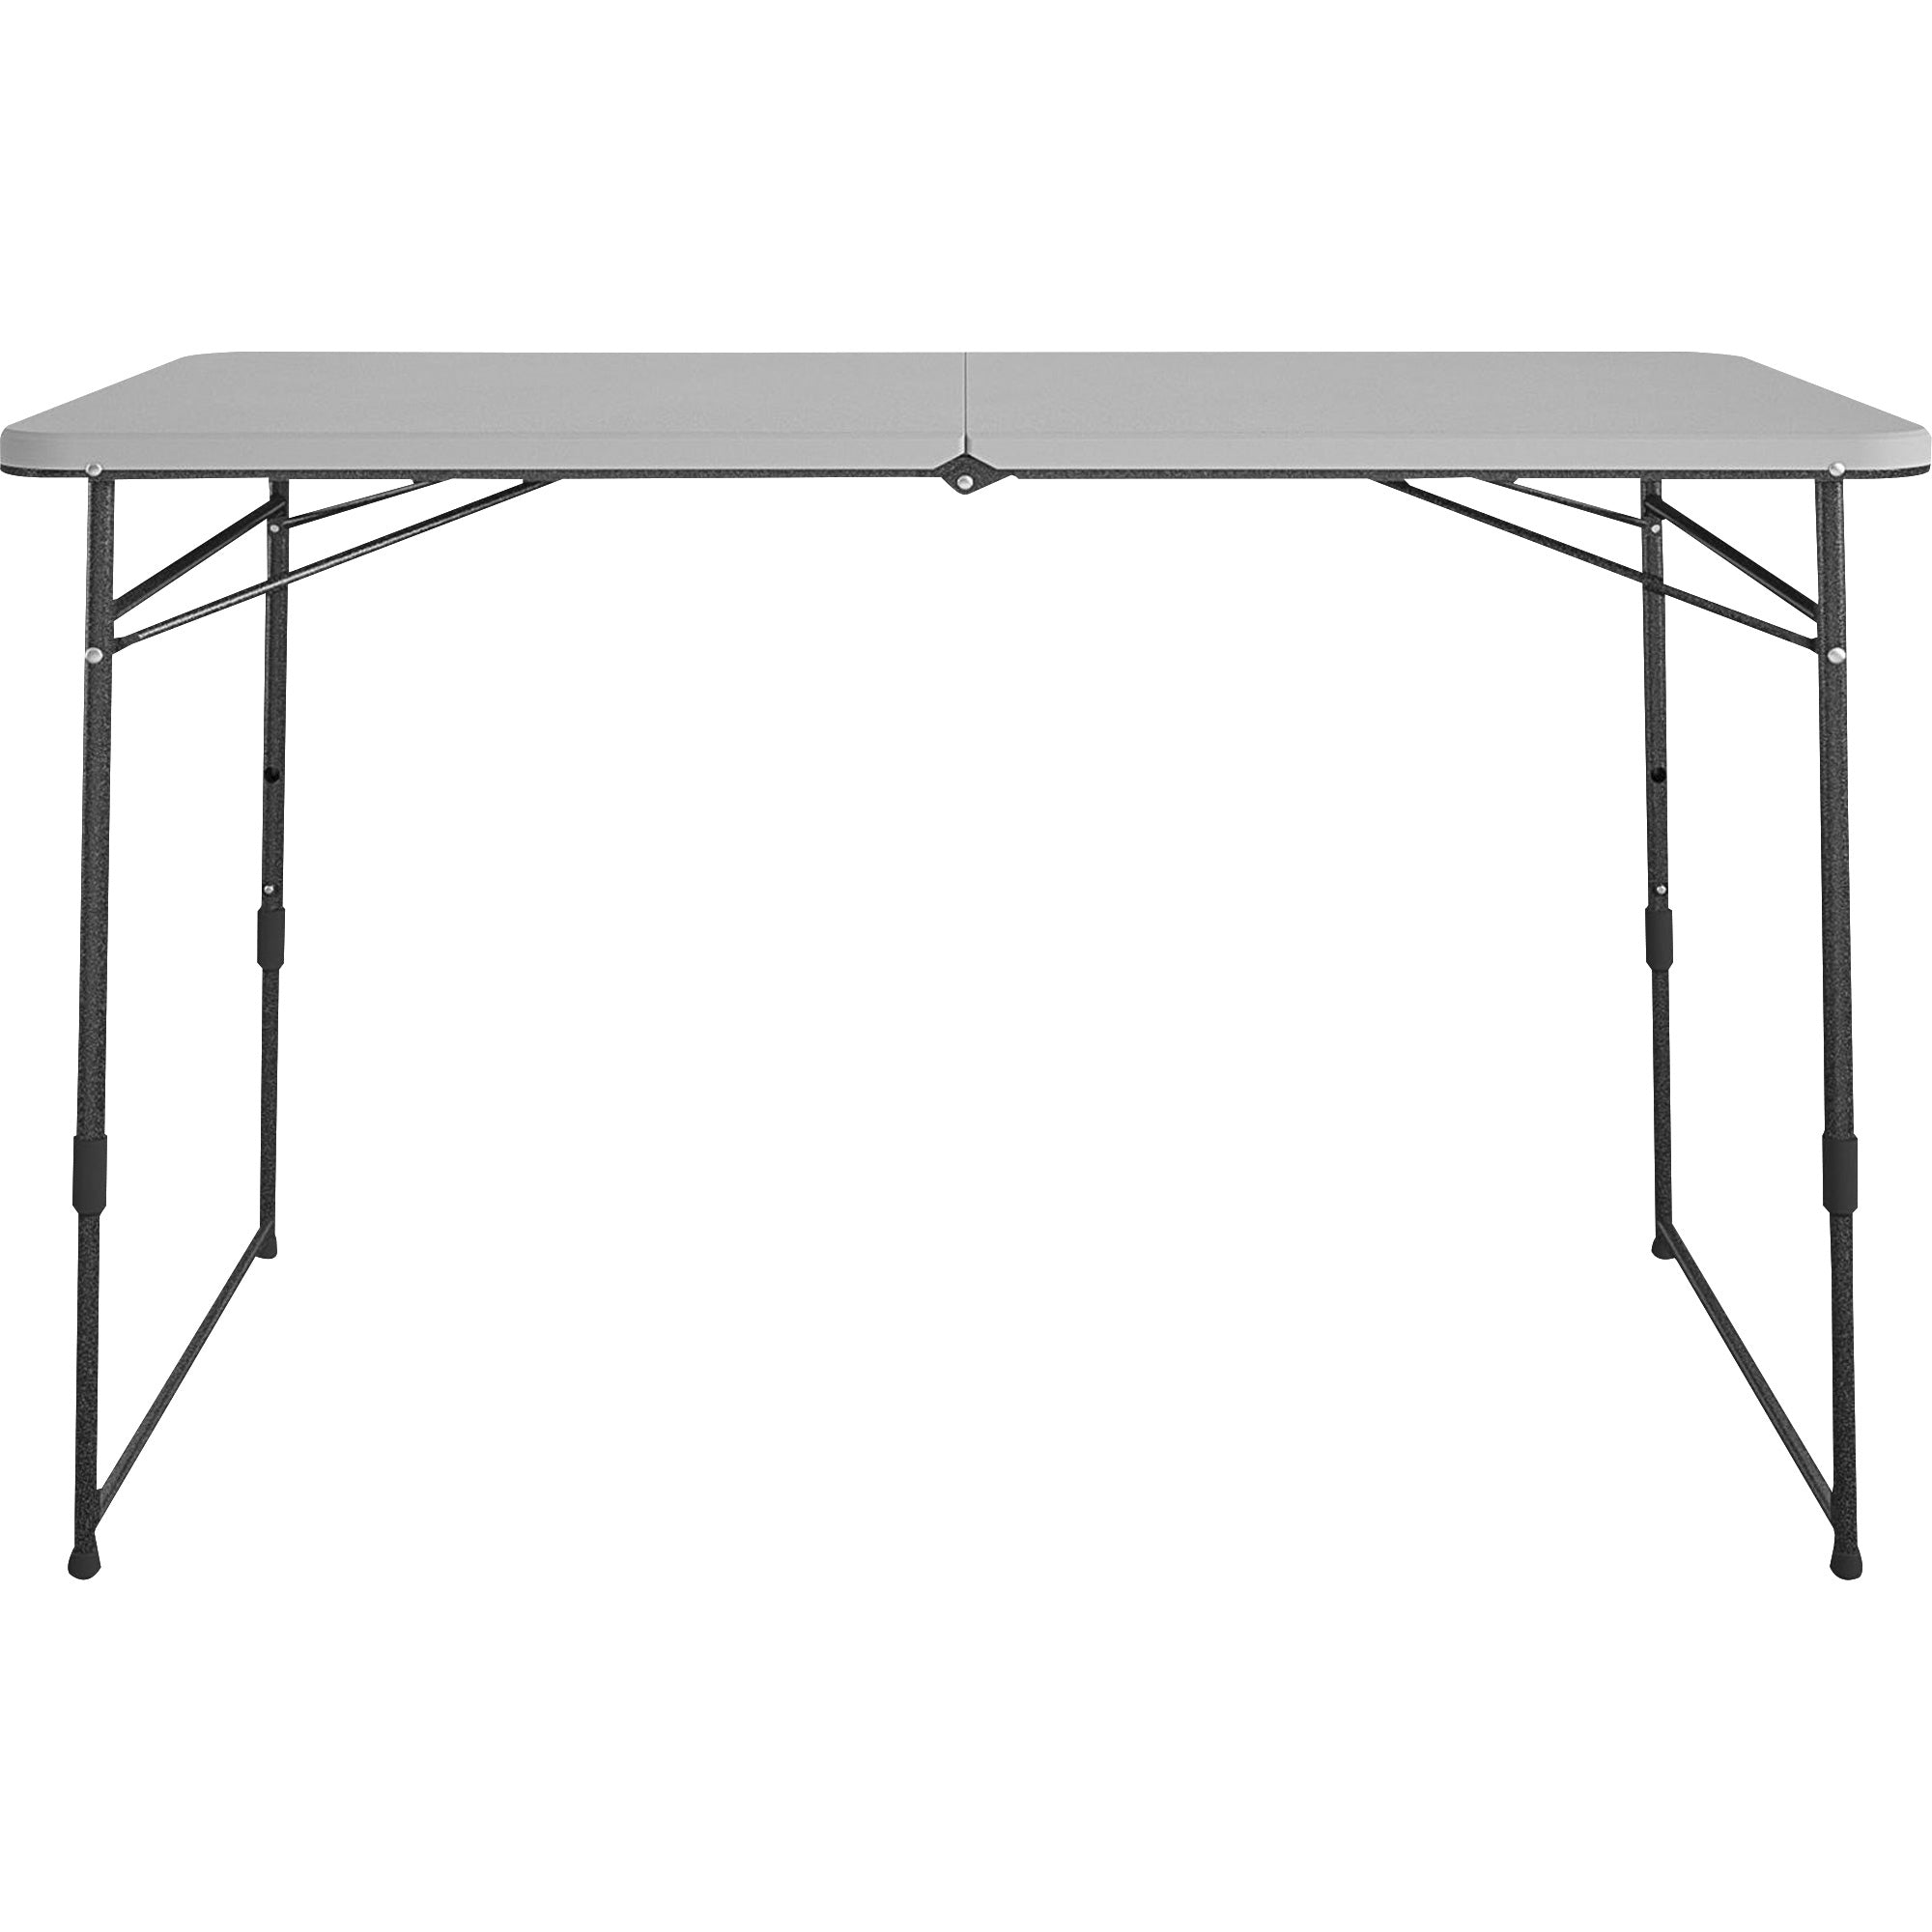 cosco-fold-portable-indoor-outdoor-utility-table-200-lb-capacity-adjustable-height-x-48-table-top-width-x-24-table-top-depth-28-height-gray-steel-resin-1-each_csc14400gry1e - 6